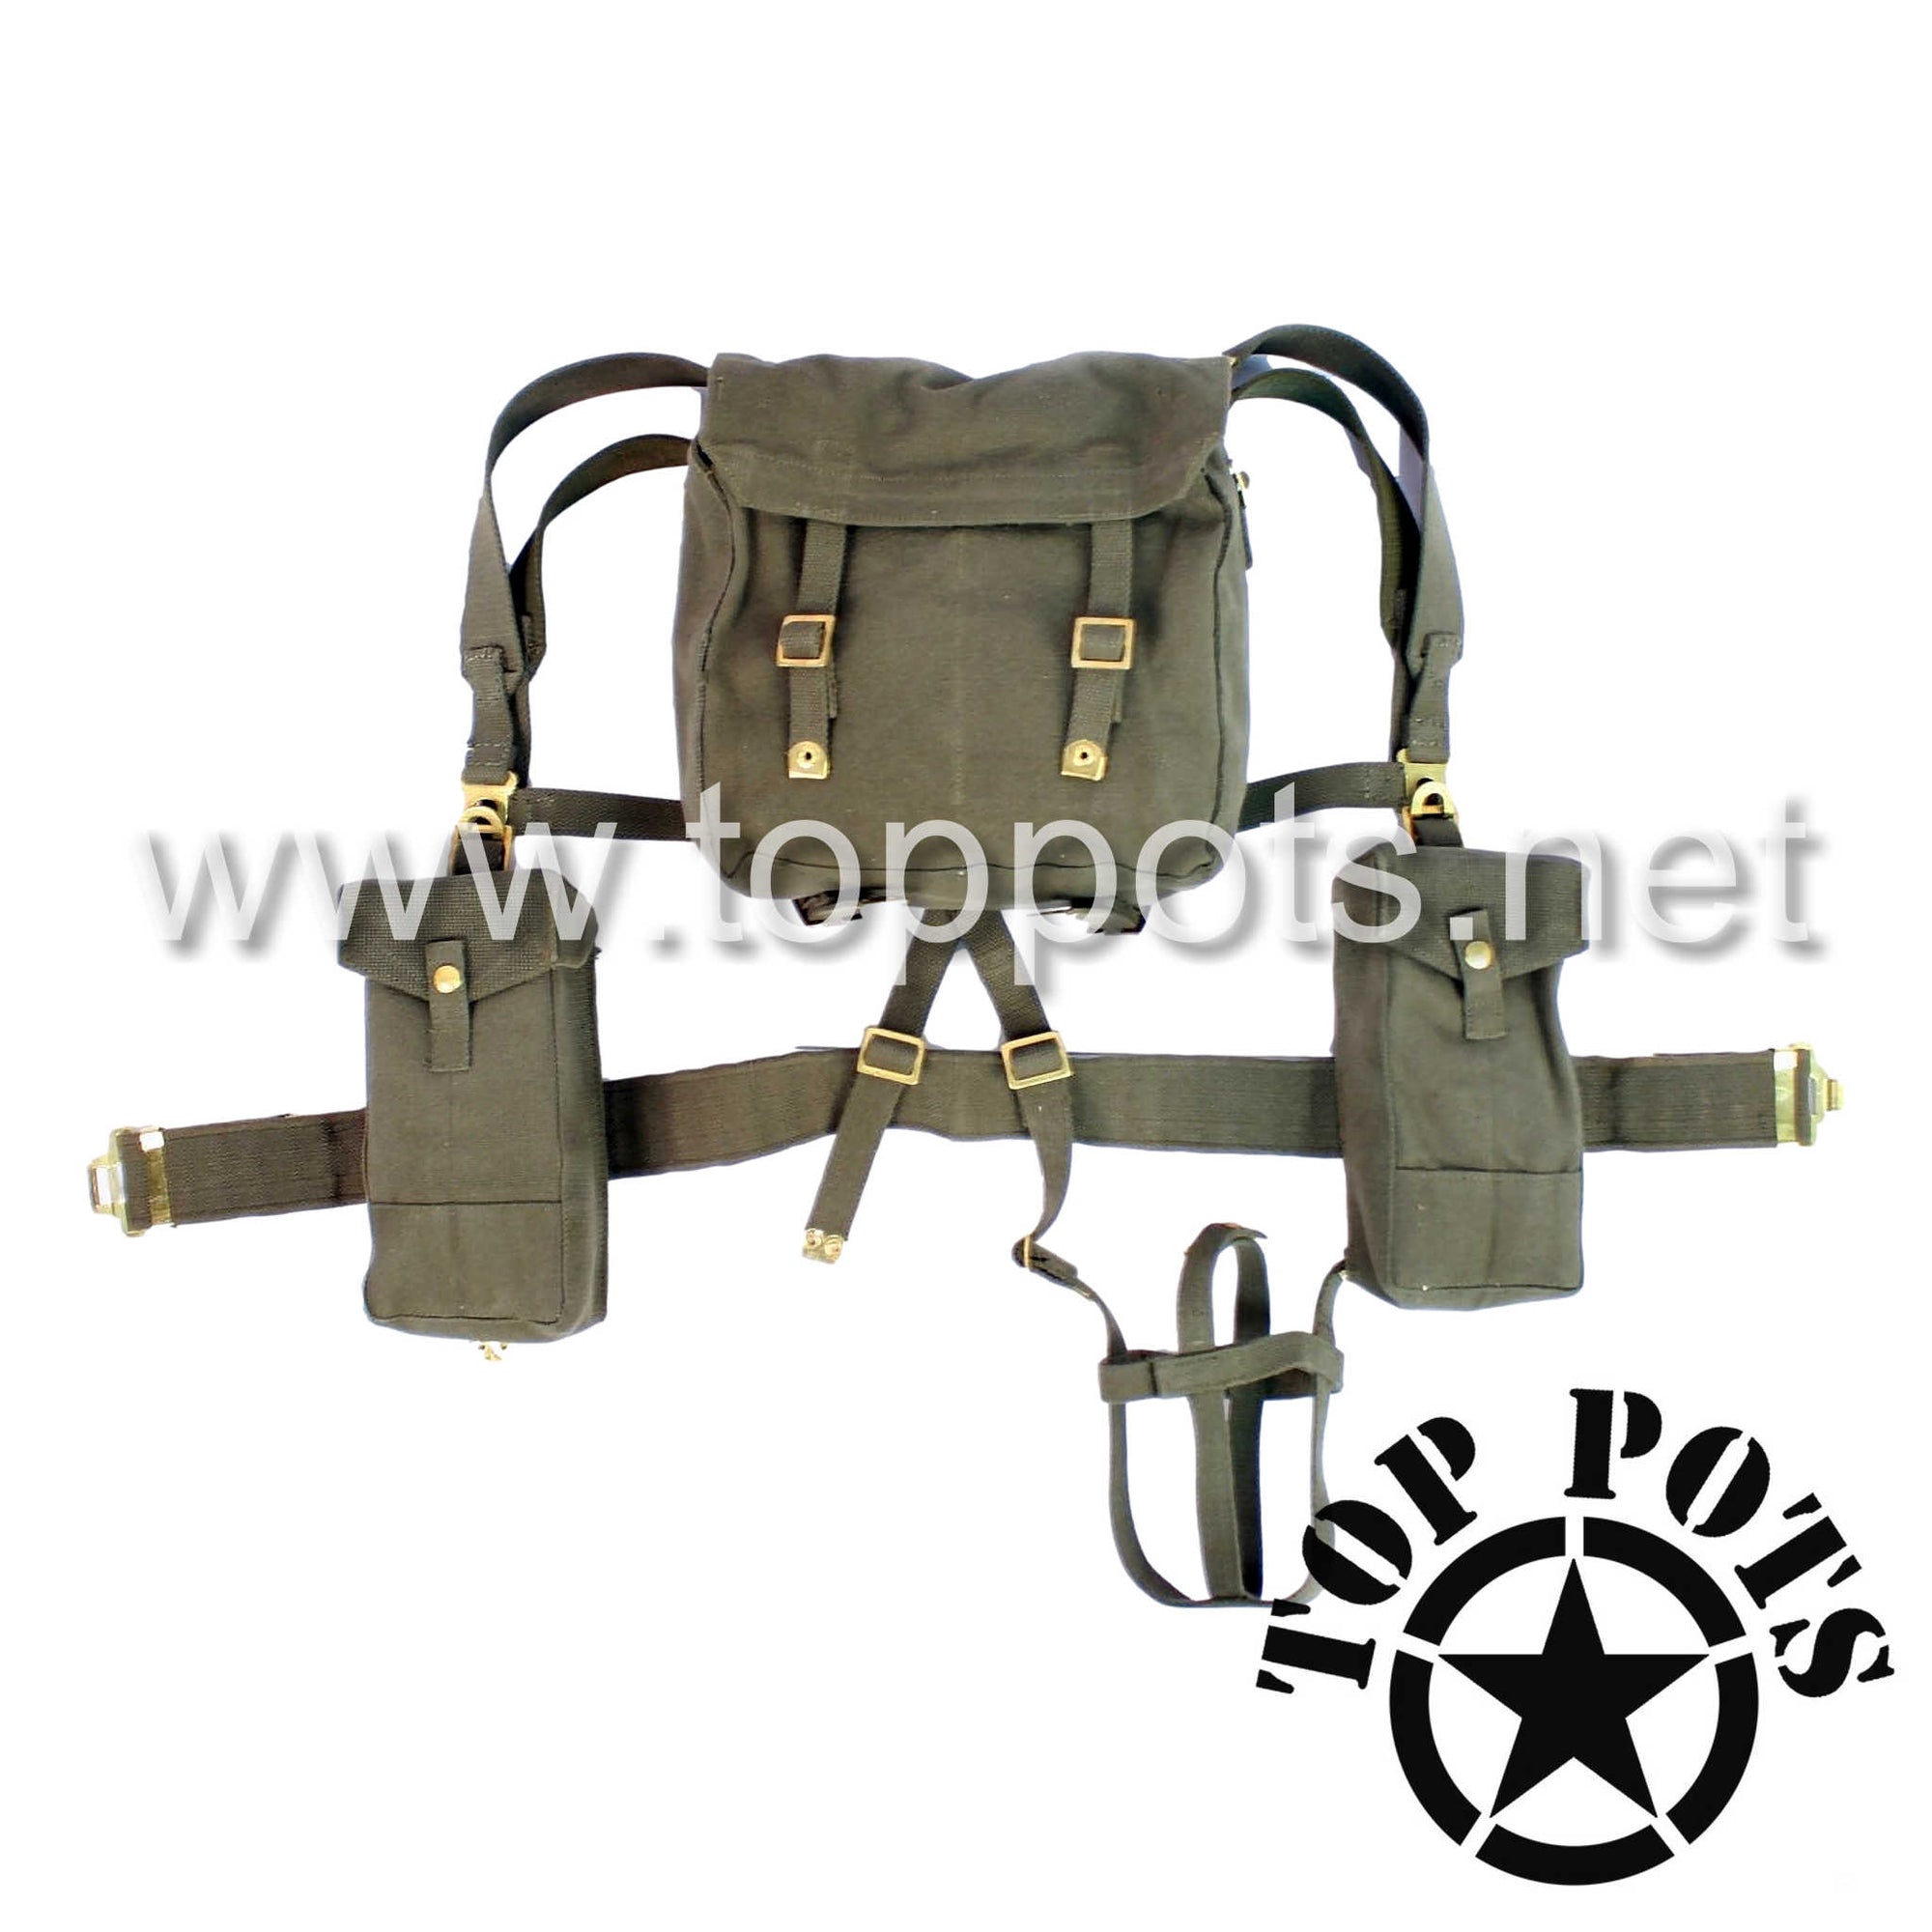 WWII Canadian Army Reproduction P37 Canvas Battle Order Webbed Equipment Set – Khaki Green Webbing